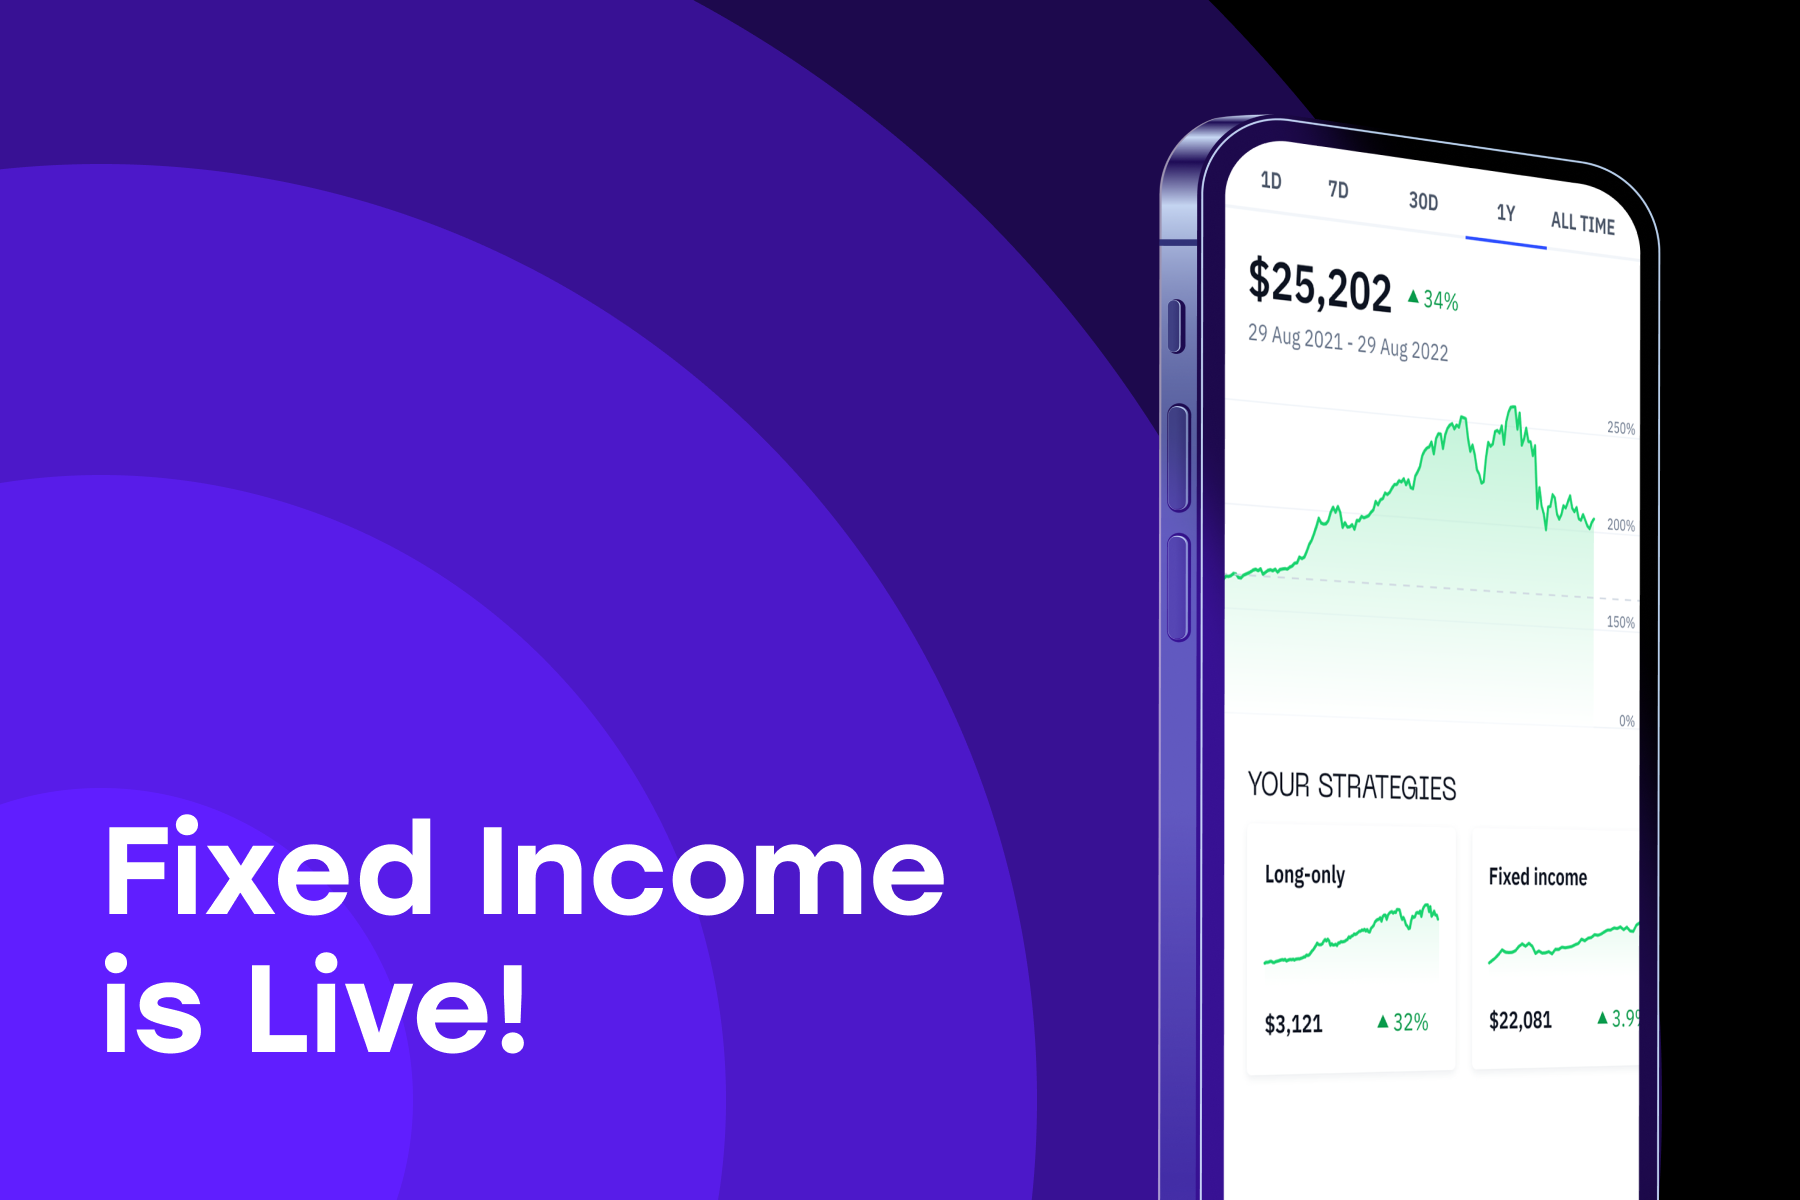 Fixed Income Strategy is Live!